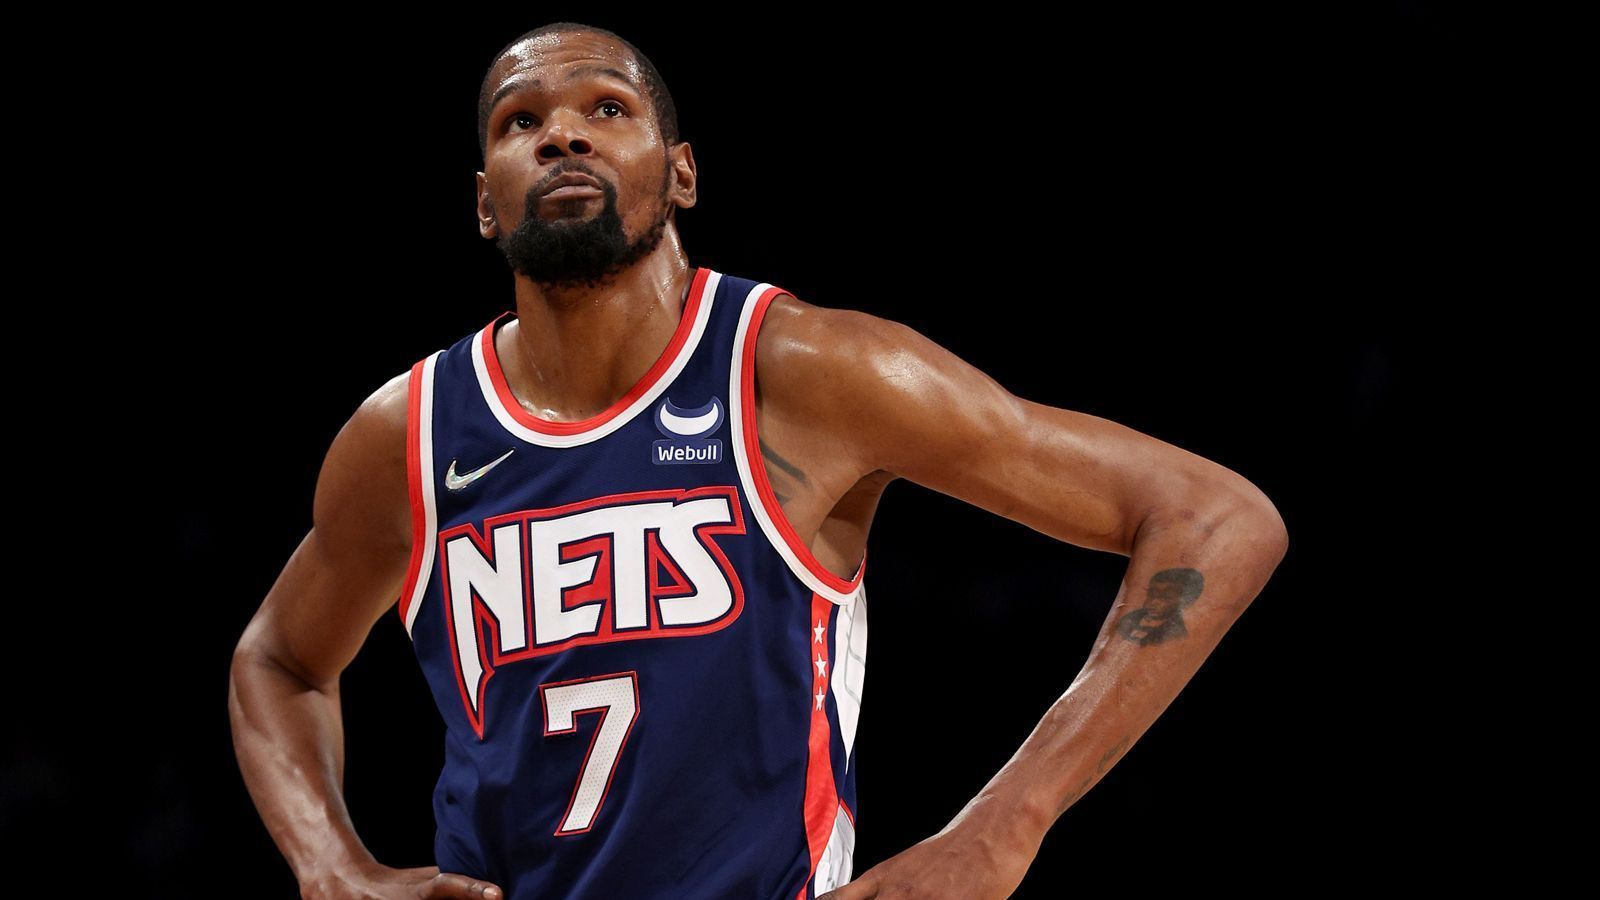 
                <strong>4. Platz: Kevin Durant (Brooklyn Nets)</strong><br>
                &#x2022; 36 Spiele -<br>&#x2022; 29,3 Punkte pro Spiel -<br>&#x2022; 7,4 Rebounds pro Spiel -<br>&#x2022; 5,8 Assists pro Spiel - <br>&#x2022; 37,2% Dreierquote -<br>
              